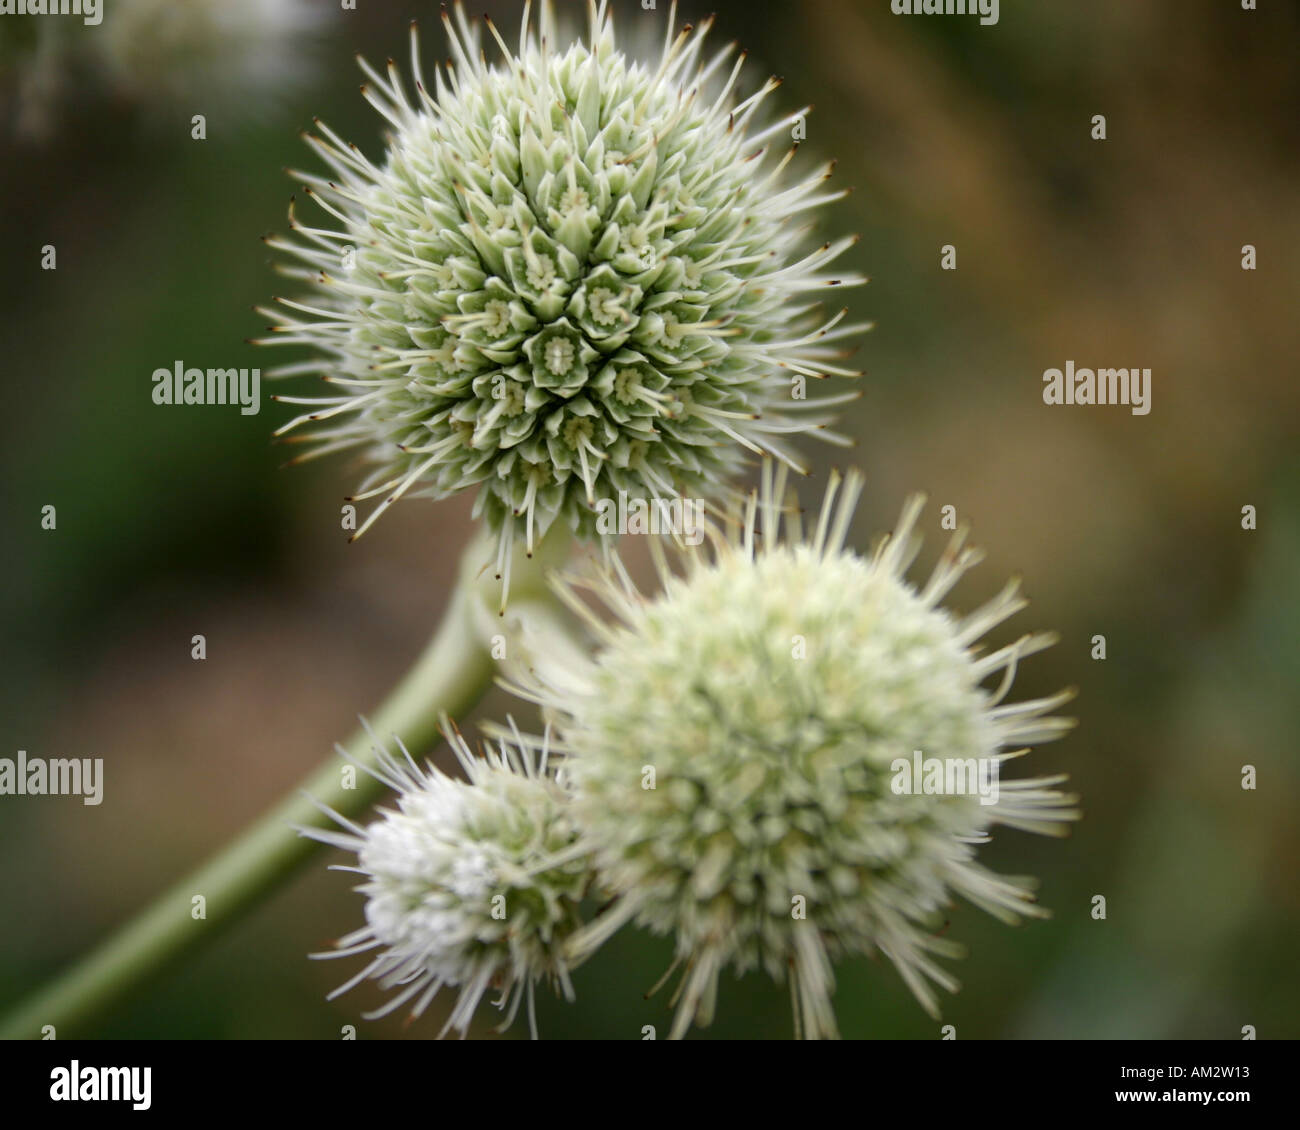 Close up Macro shot of two Delicate Round Flowers on a green stem Stock Photo